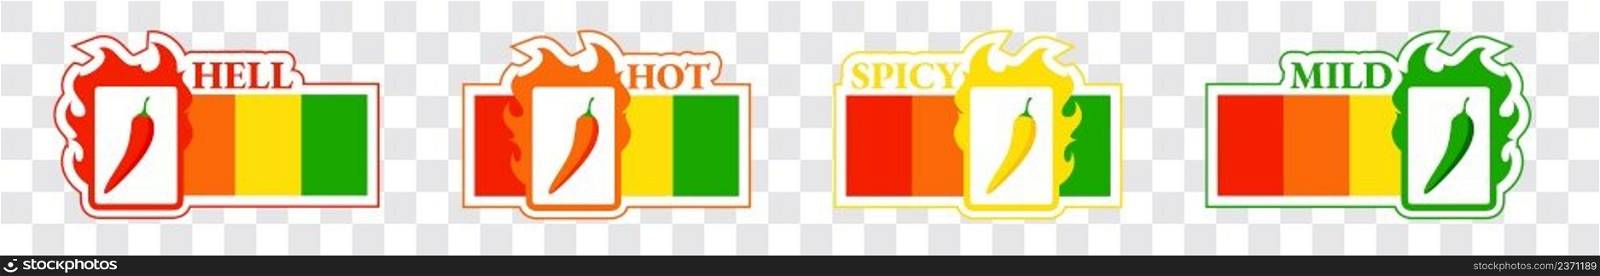 Spicy hot chili pepper icons set with flame and rating of spicy Mild, medium hot and extra hot level of pepper sauce or snack food Chili pepper or chile habanero and jalapeno level Hot pepper sign. Spicy hot chili pepper icons set with flame and rating of spicy Mild, medium hot and extra hot level of pepper sauce